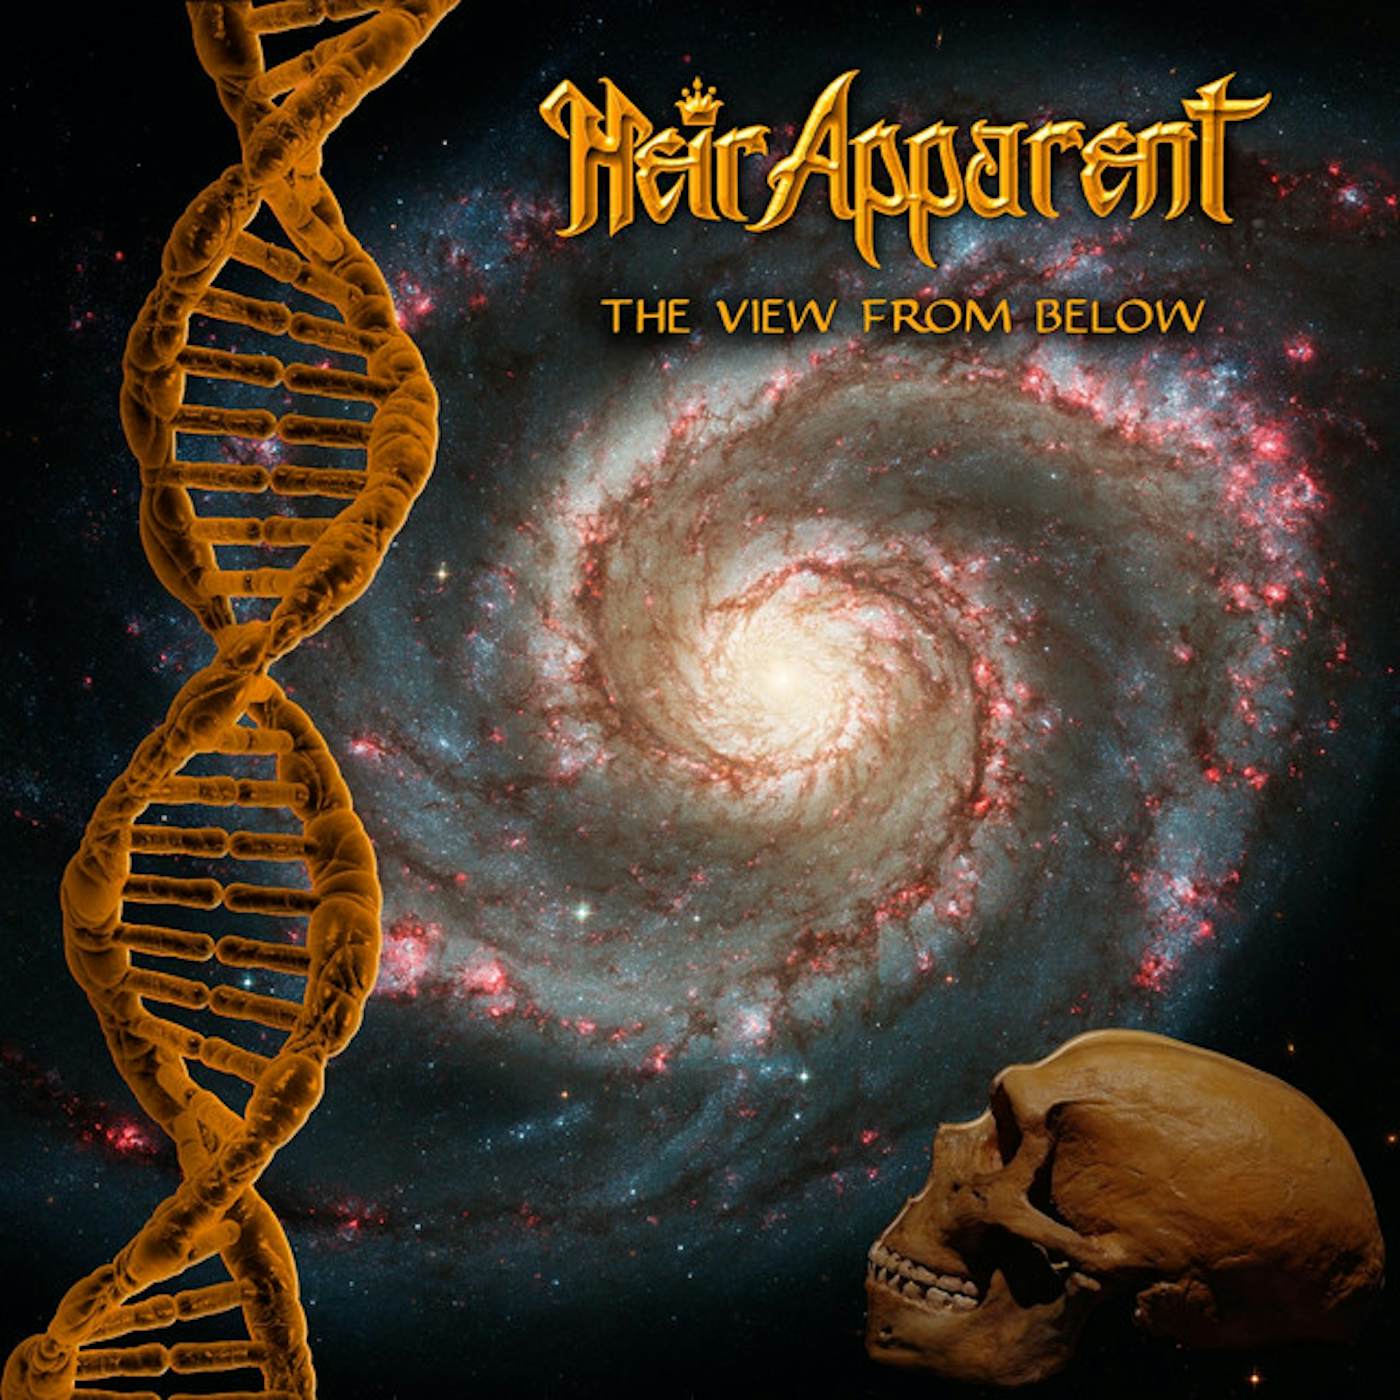 Heir Apparent VIEW FROM BELOW Vinyl Record